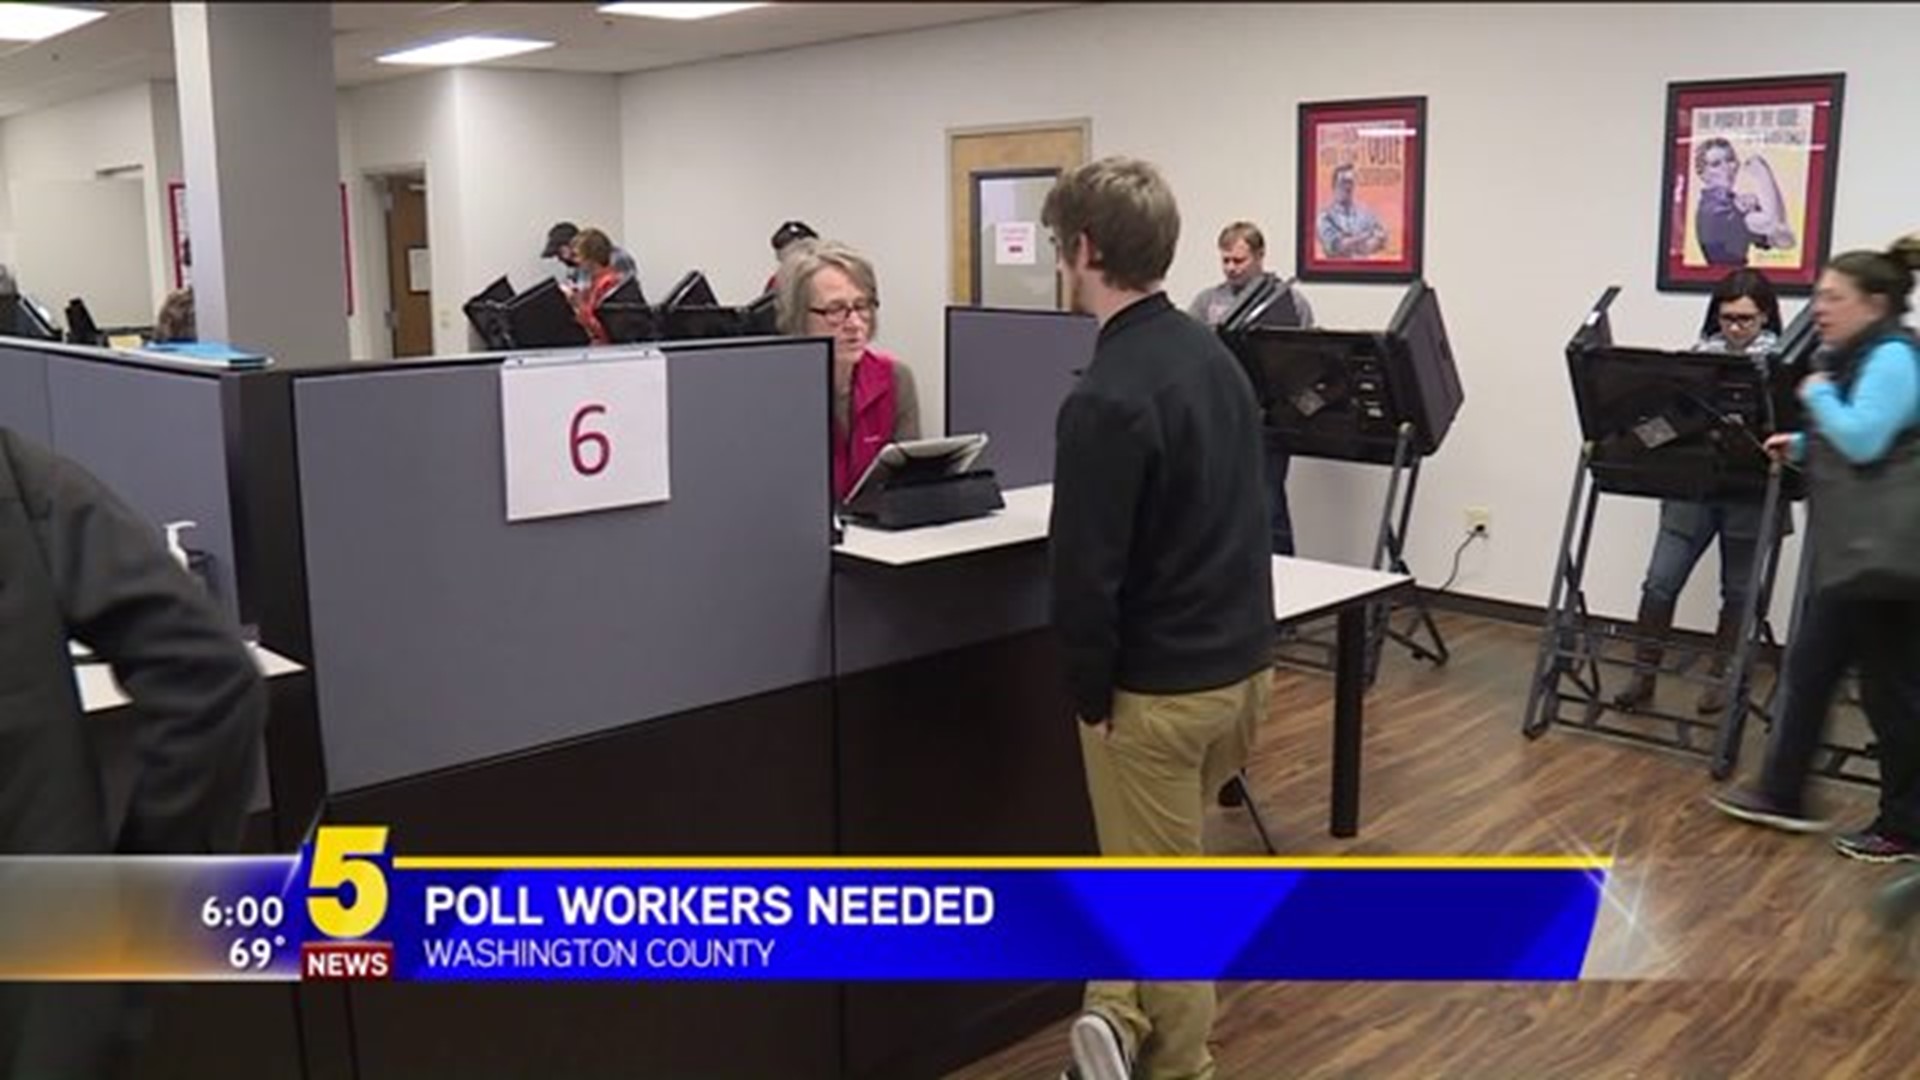 POLL WORKERS NEEDED IN WASHINGTON COUNTY